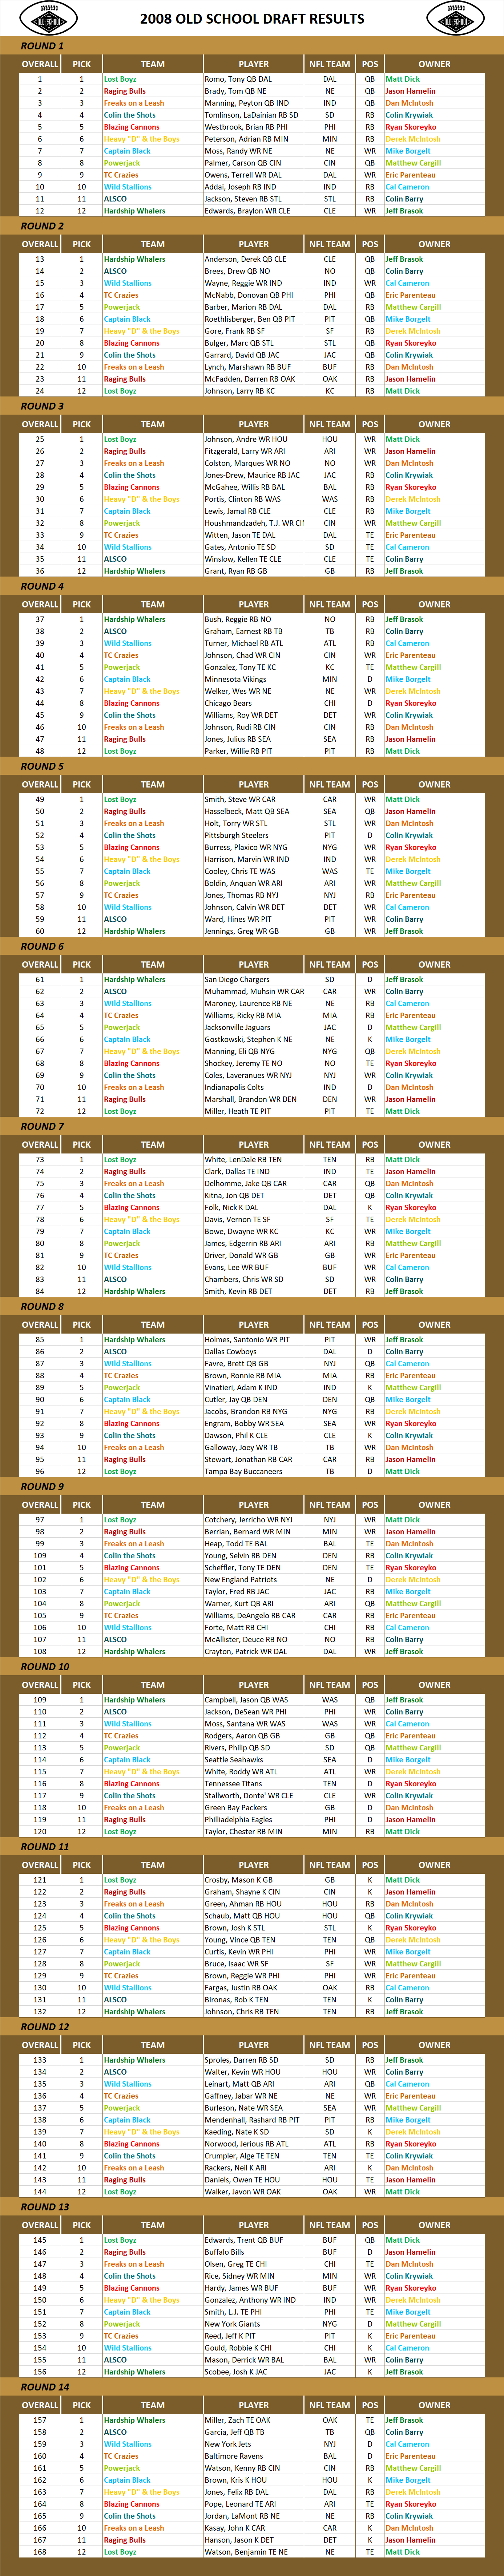 2008 National Football League Pool Draft Results